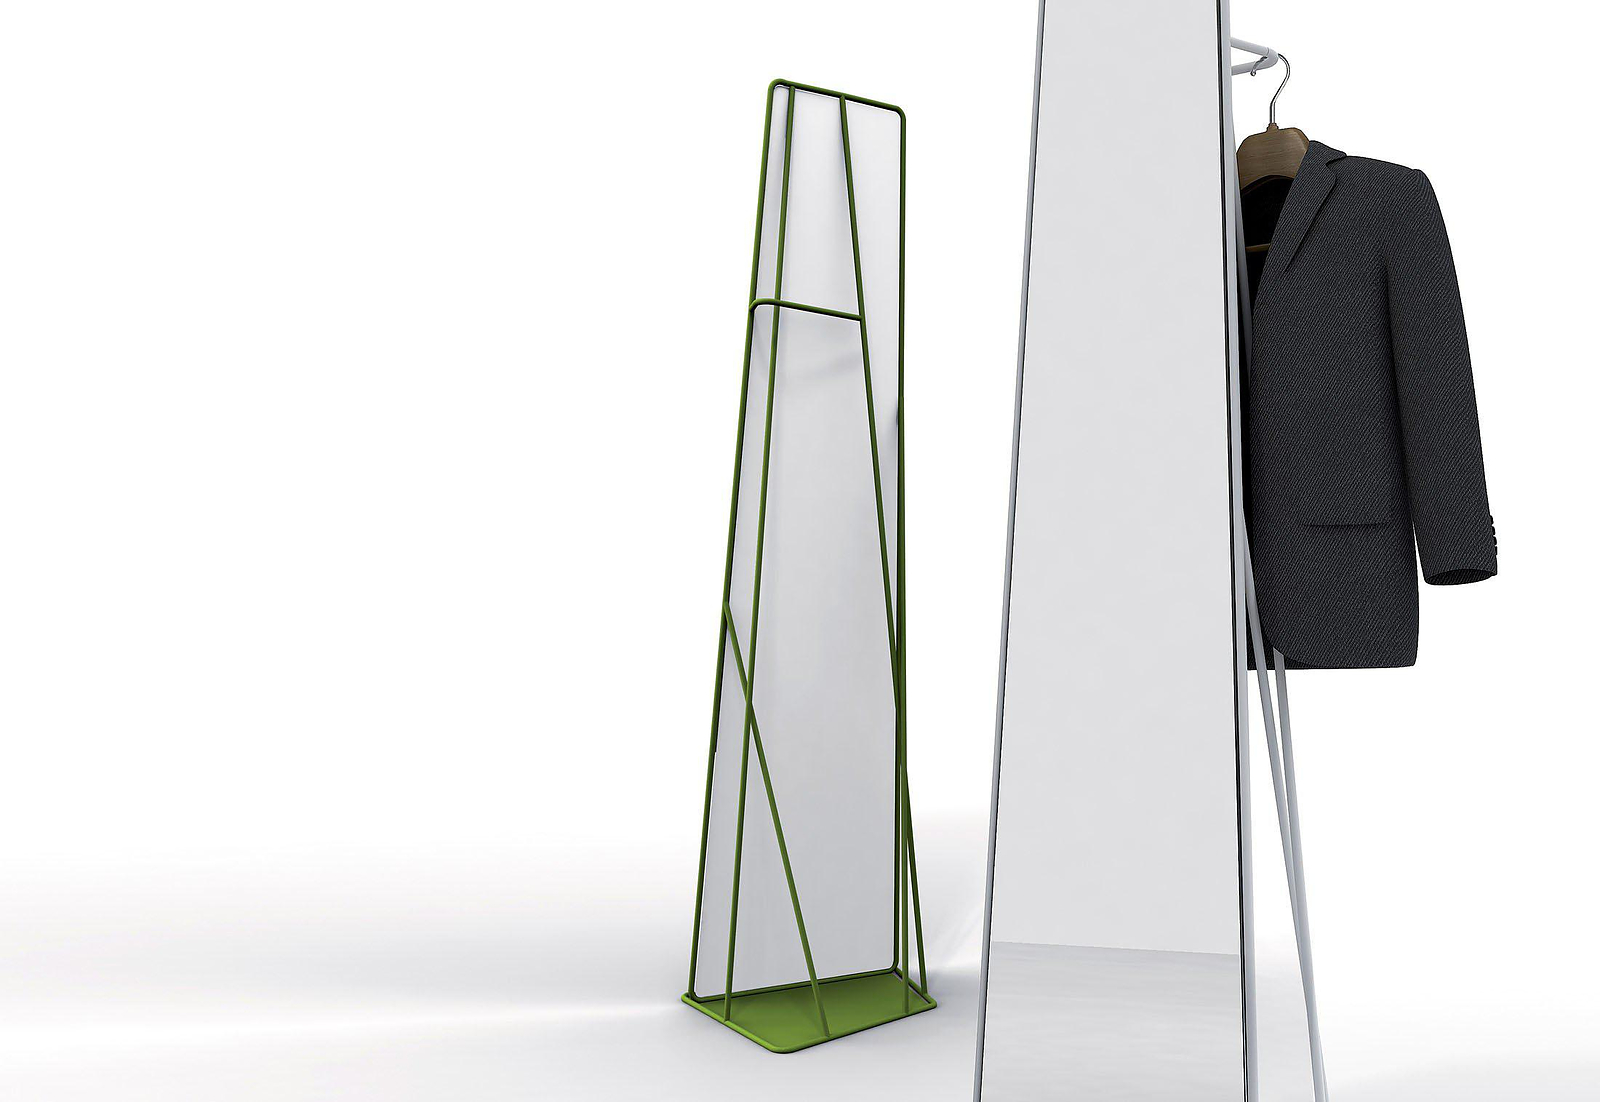 Watergate Mirror by Roberto Paoli for spHaus.